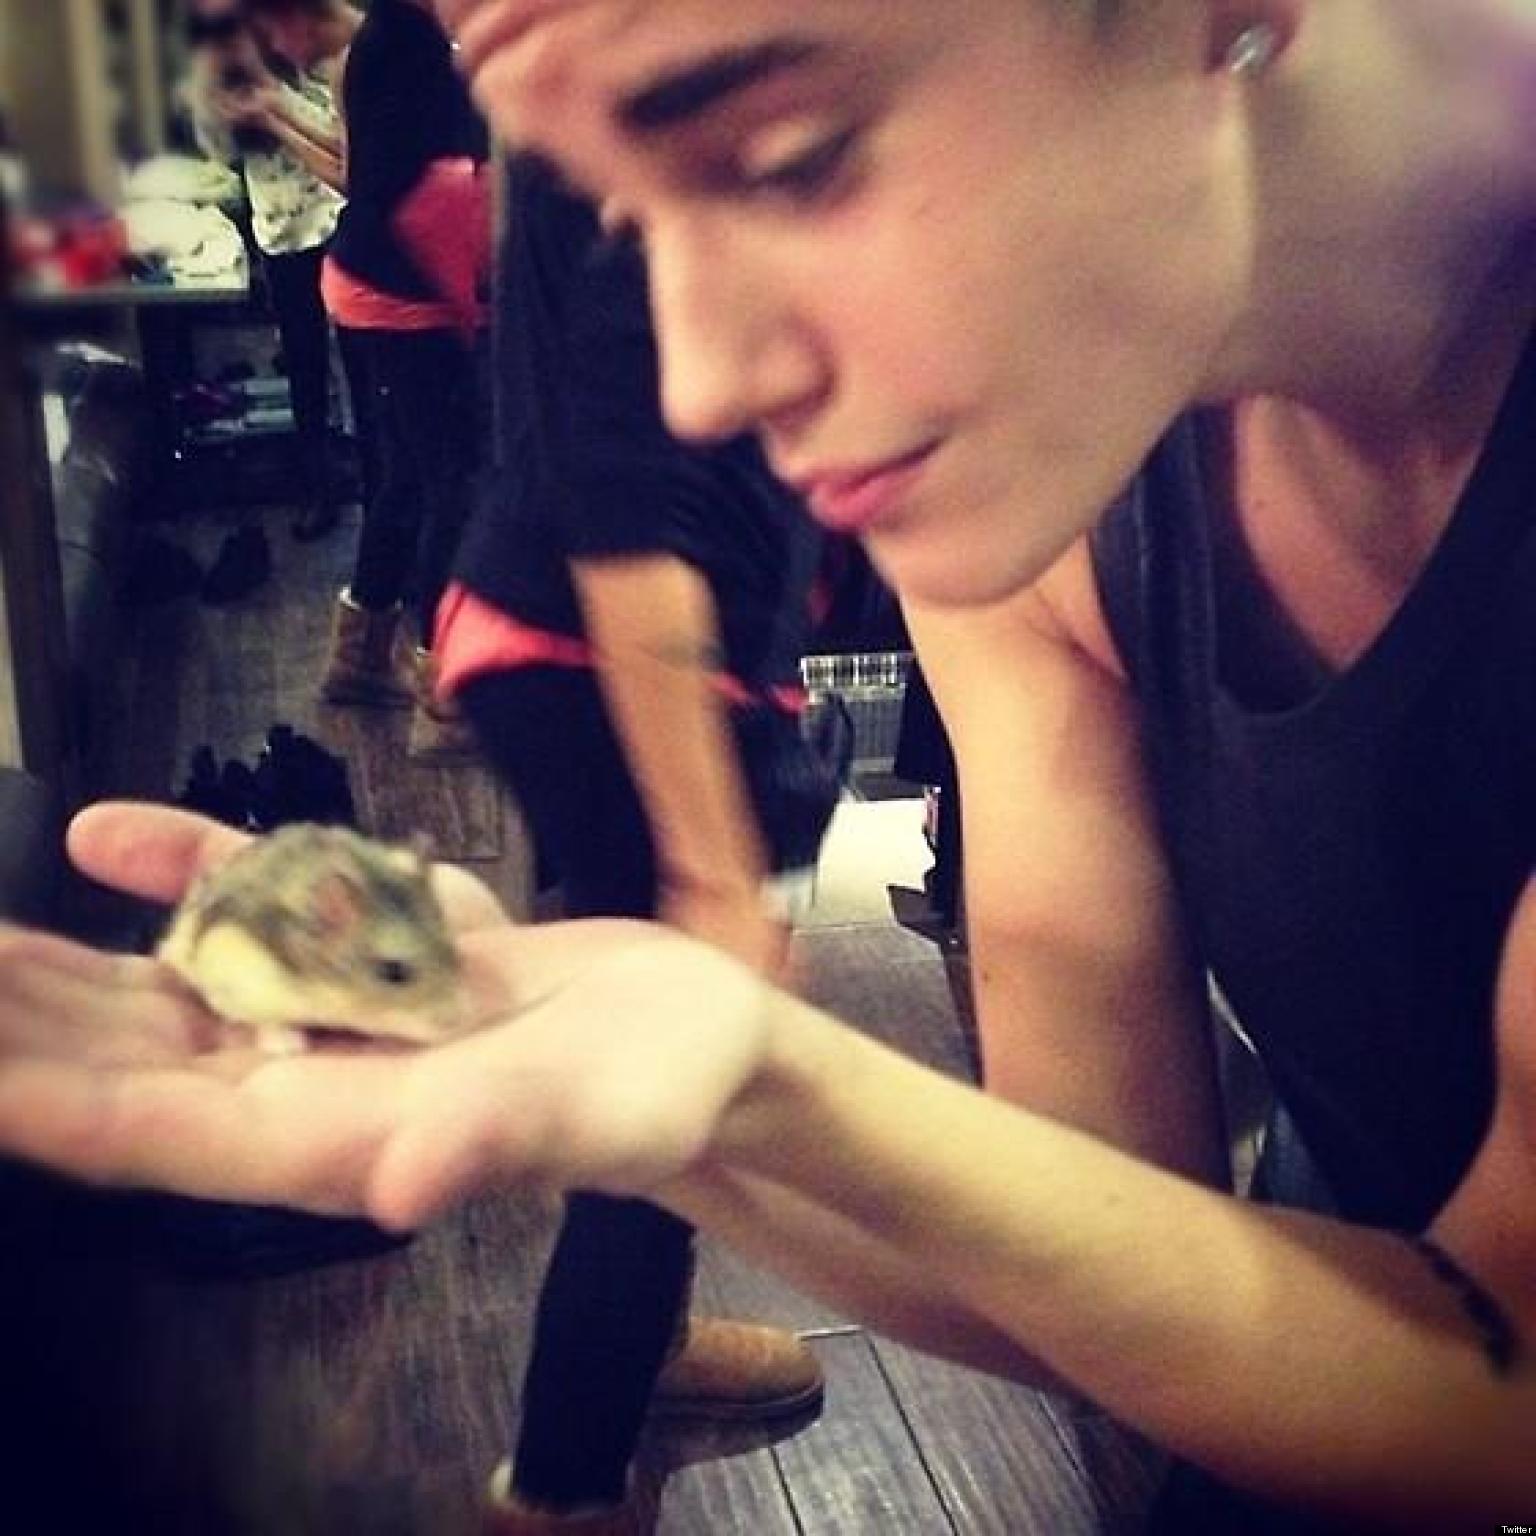 Justin Bieber Accused Of Animal Cruelty After Handing Pet Hamster To Screaming Fan